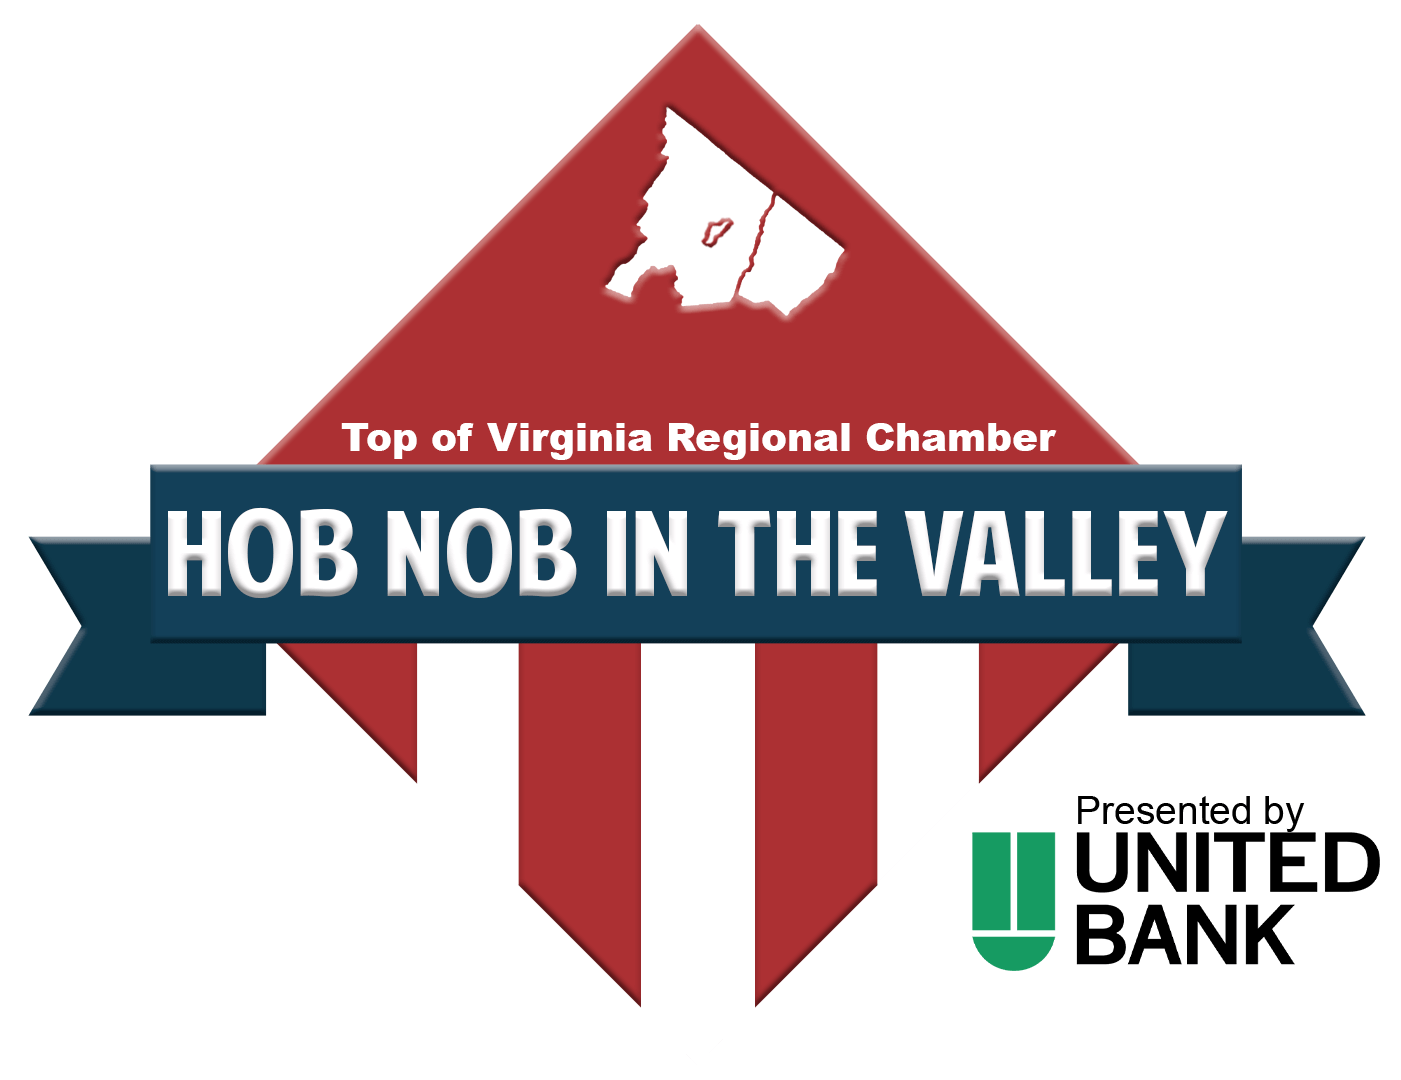 Hob Nob in the Valley